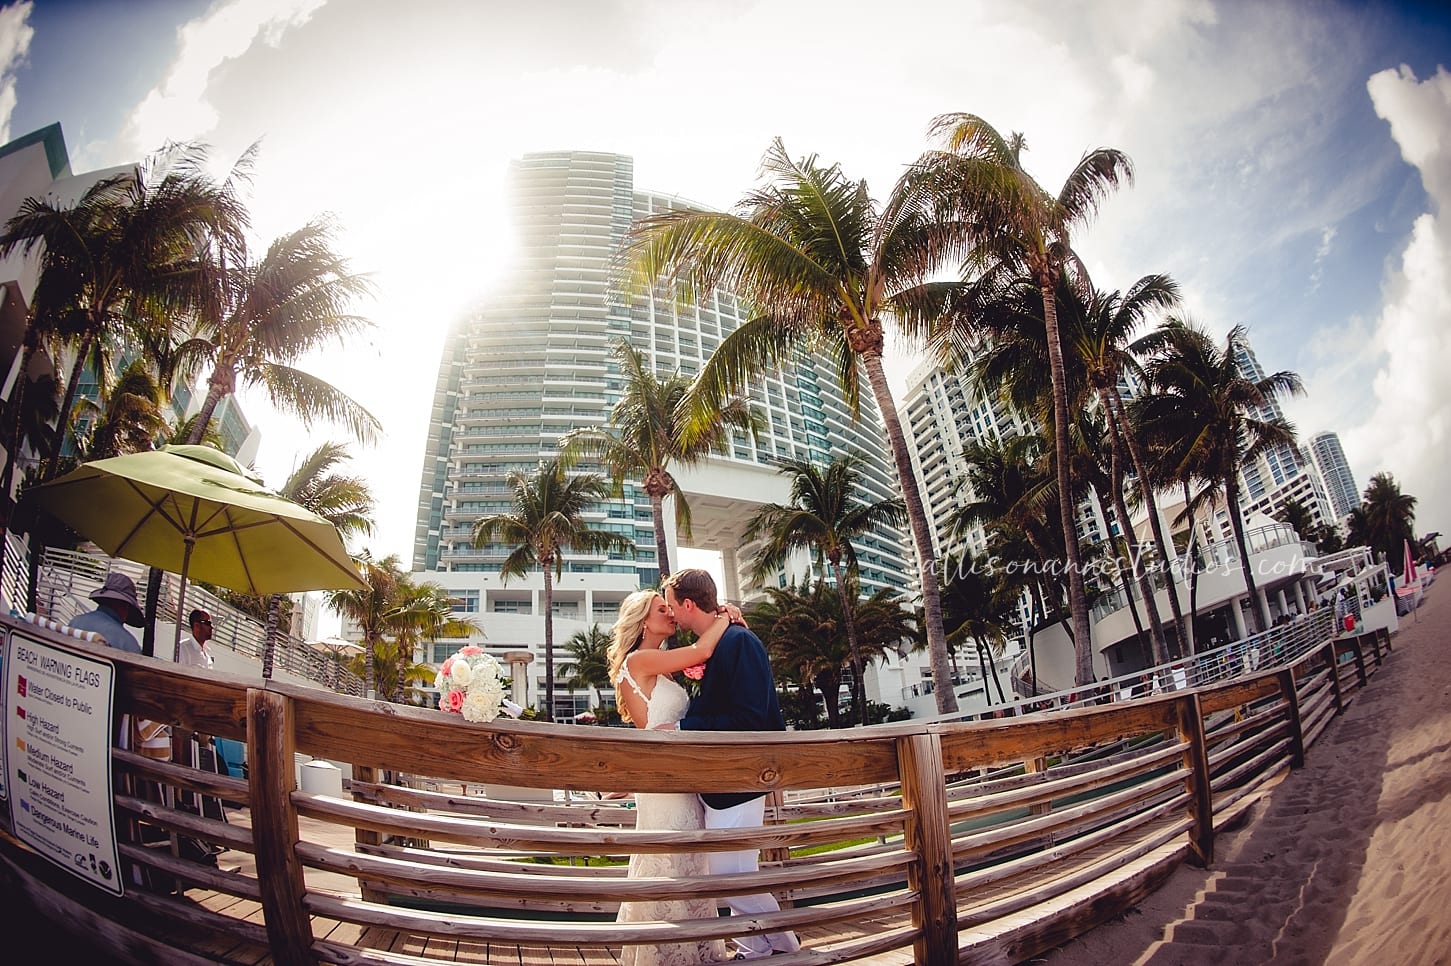 Hollywood, destination wedding, The Grand Floridian Yacht, the Diplomat, late night plunge, all night party, fun couple, love, marriage, AllisonAnne Studios, Allison Gallagher, hammonton